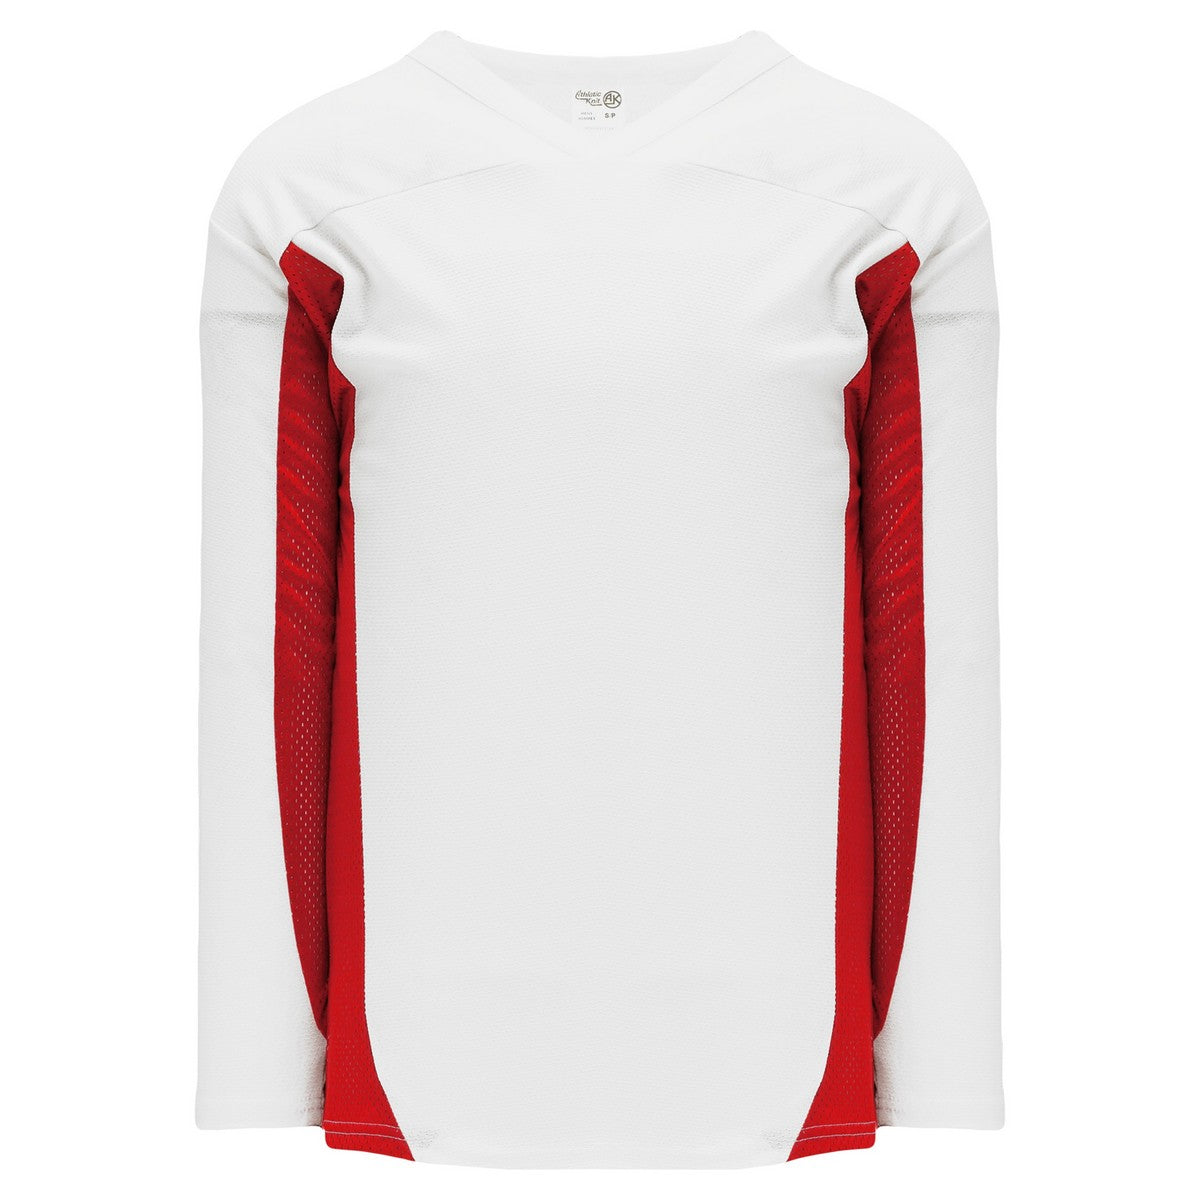 League Series H7100 Jersey in White-Red